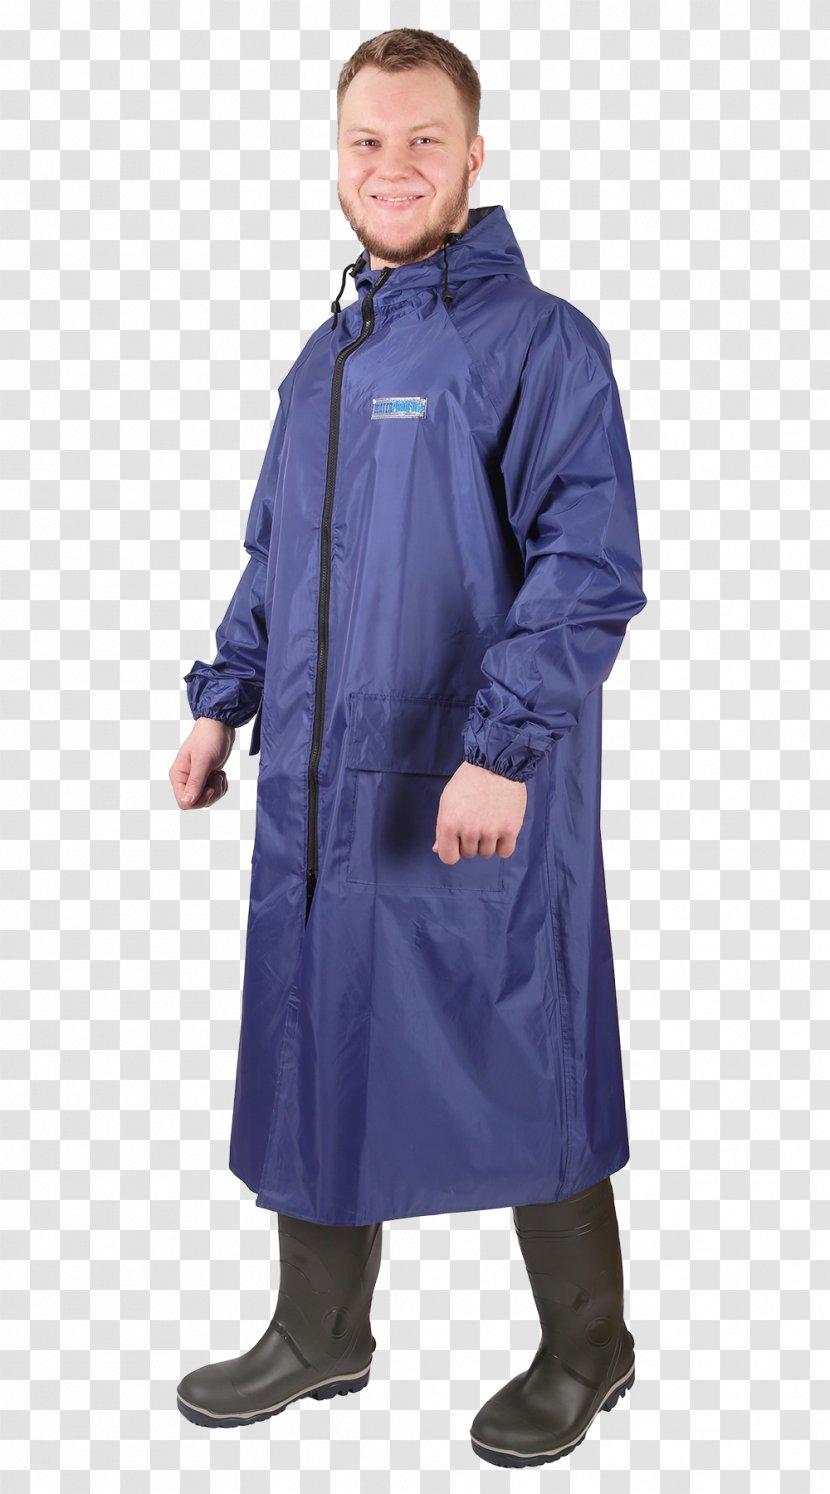 Raincoat Jacket Personal Protective Equipment Workwear Clothing Transparent PNG